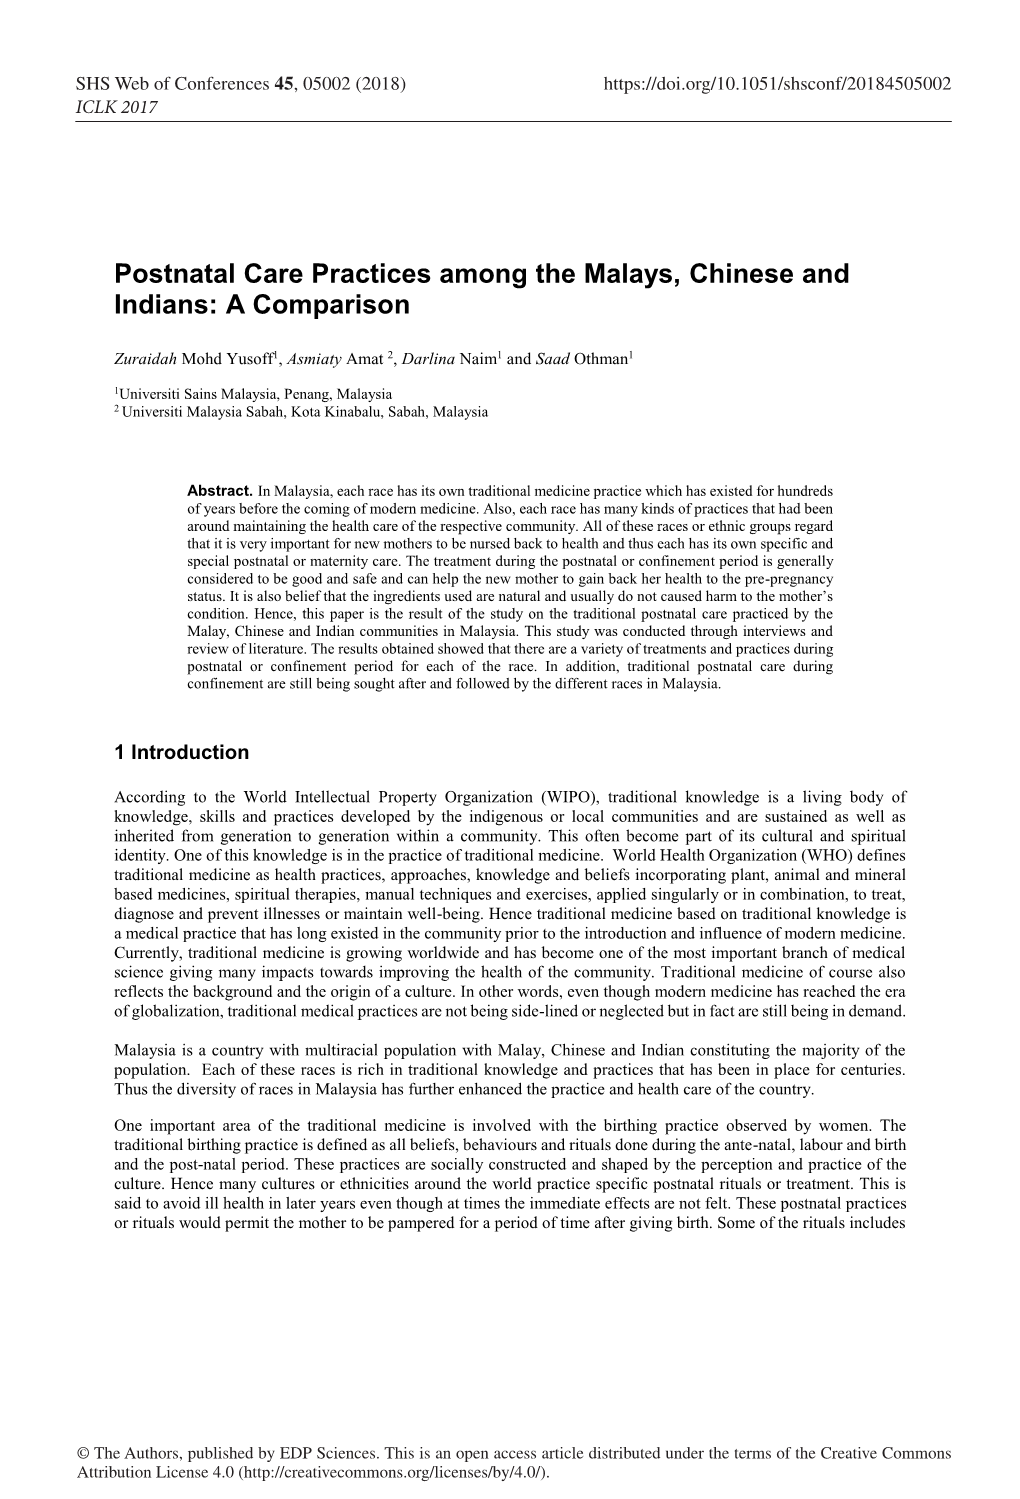 Postnatal Care Practices Among the Malays, Chinese and Indians: a Comparison